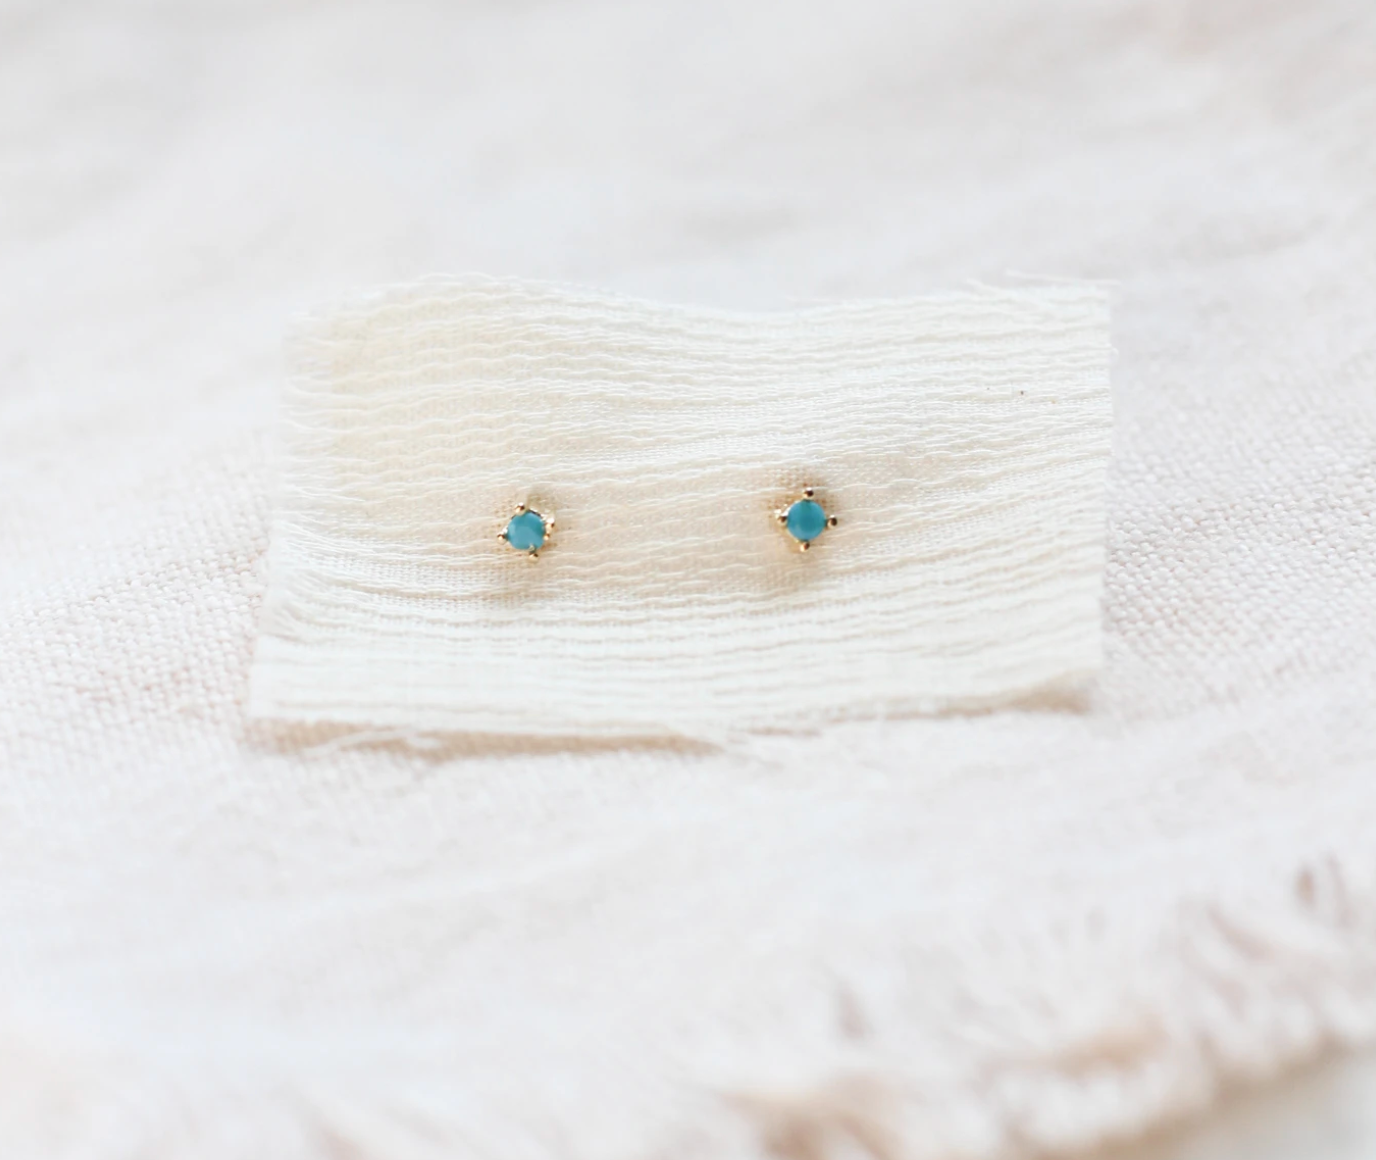 Stud earrings with vintage turquoise faceted stones. Made in sterling silver with a thick layer of 14k gold Vermeil. Handmade in the Santa Cruz Mountains.